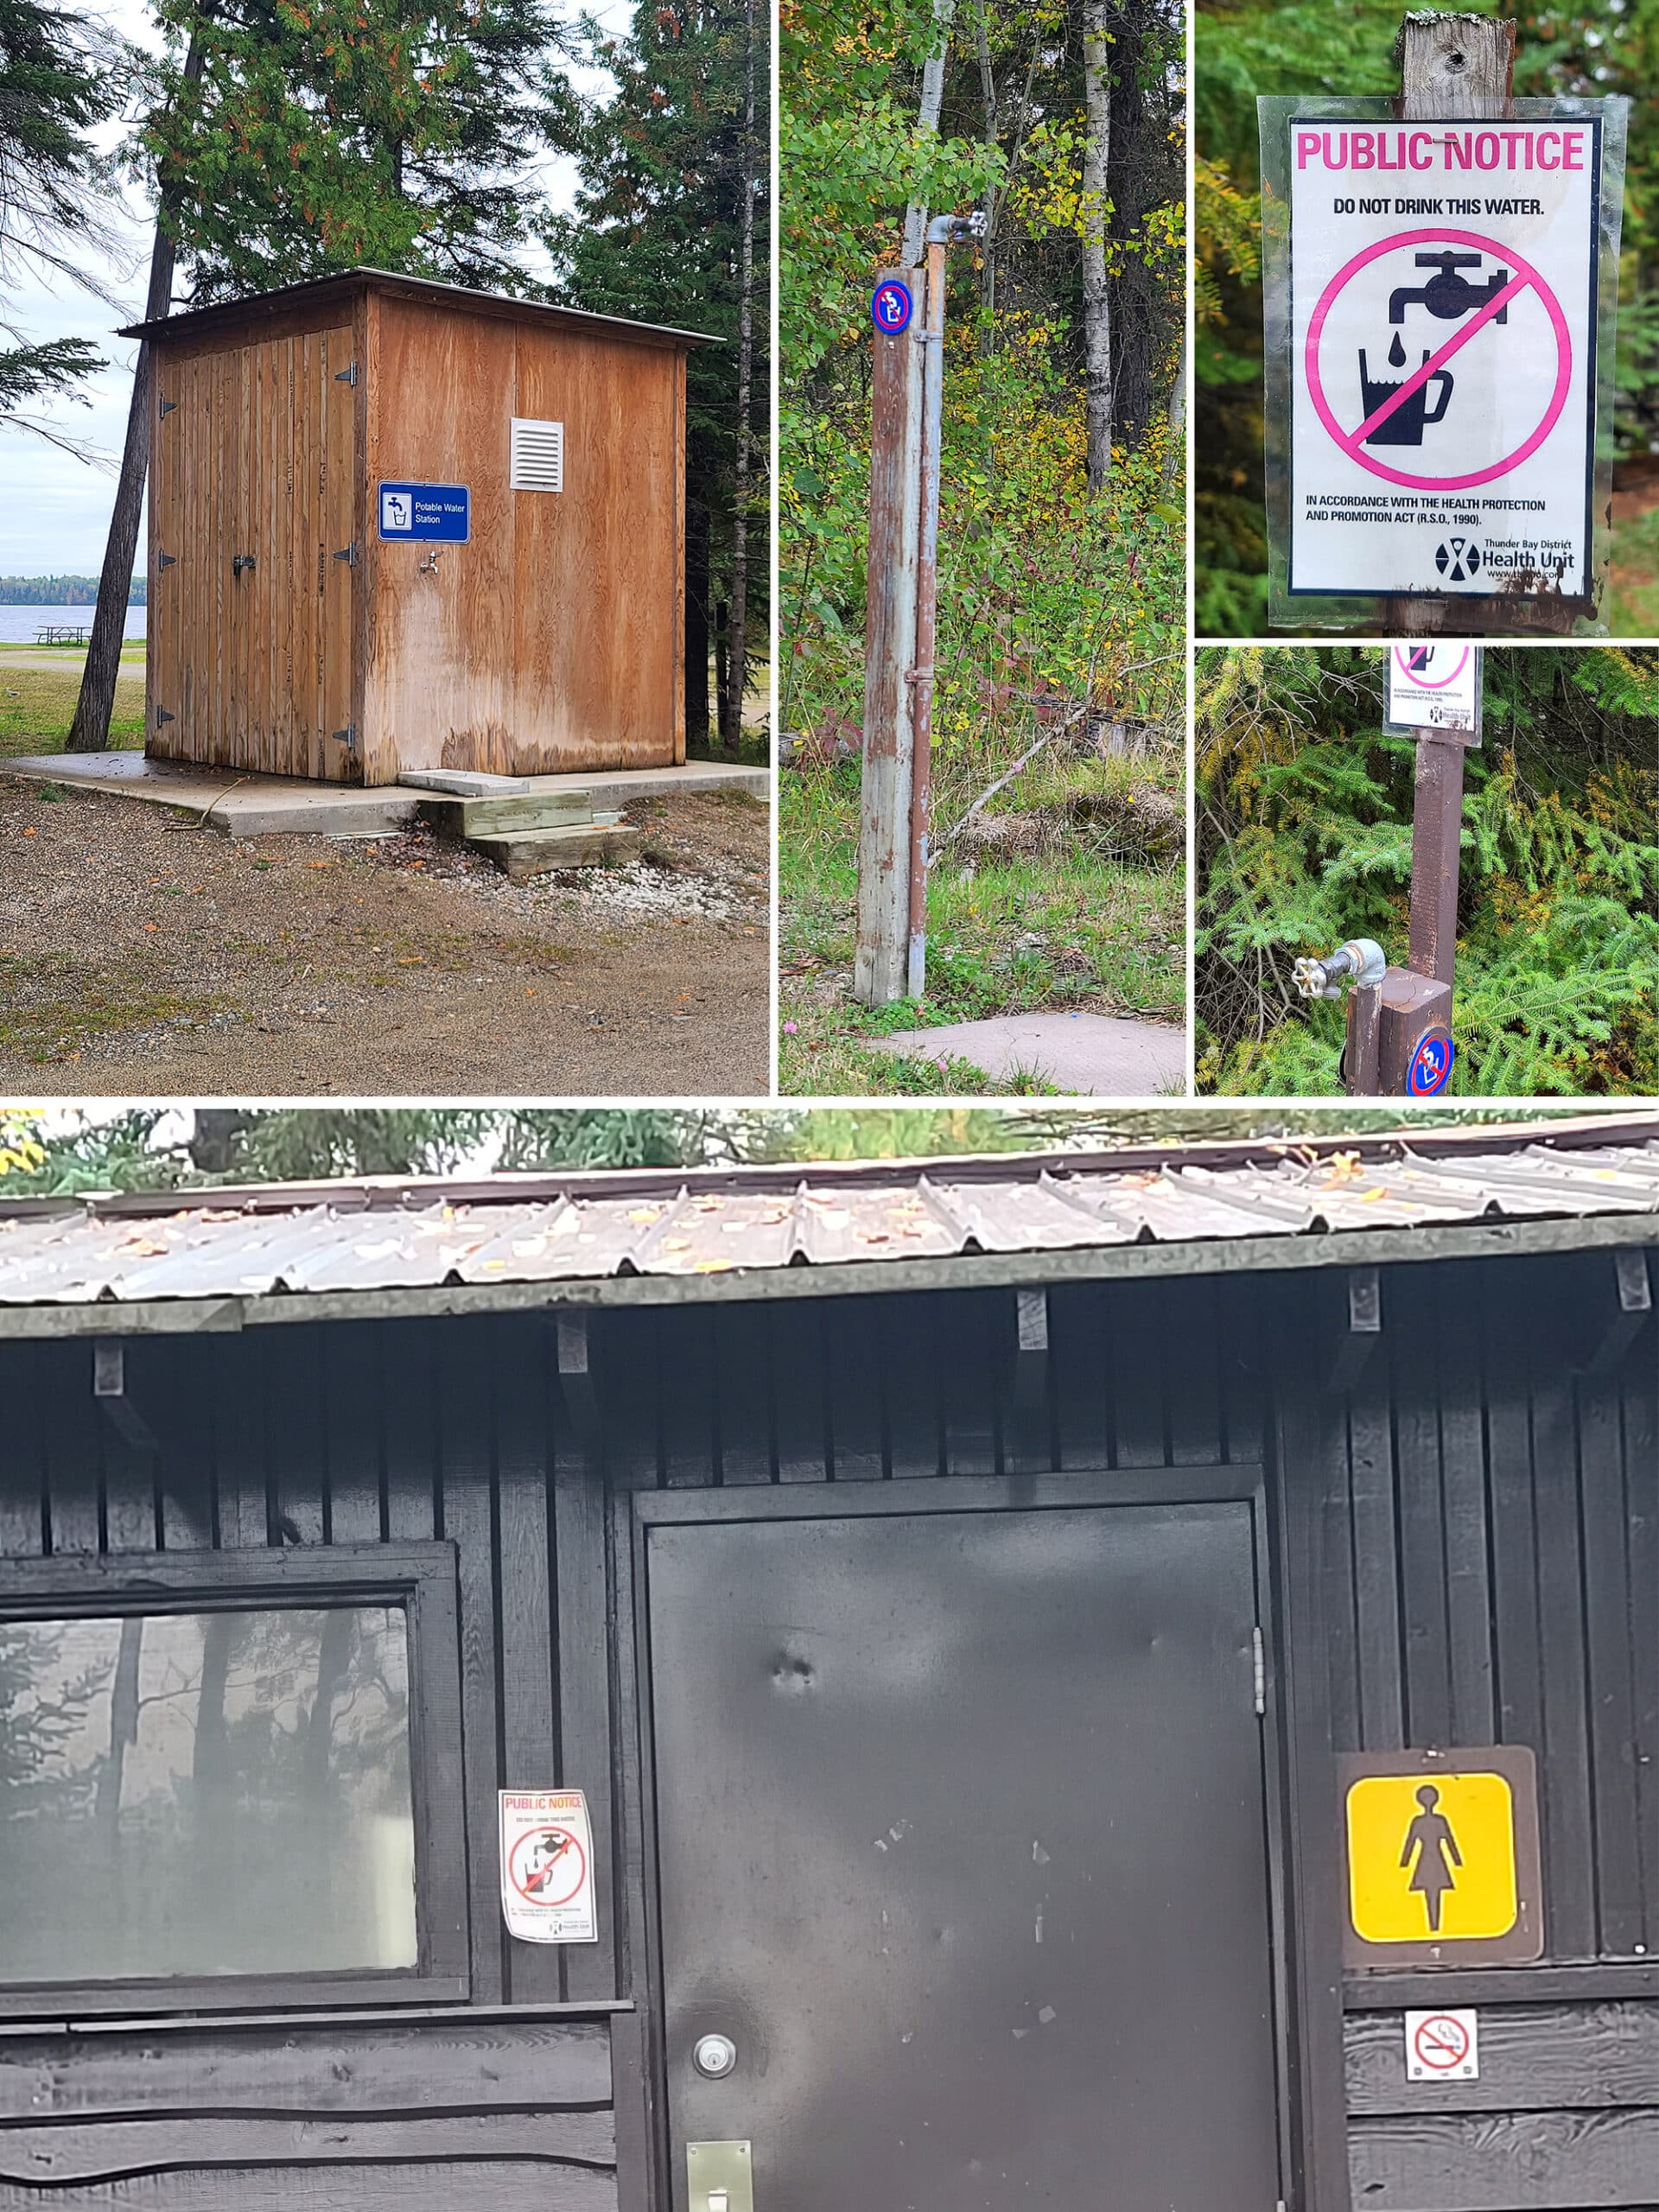 A 4 part image showing a potable water station, and several taps with signs saying not to drink the water.